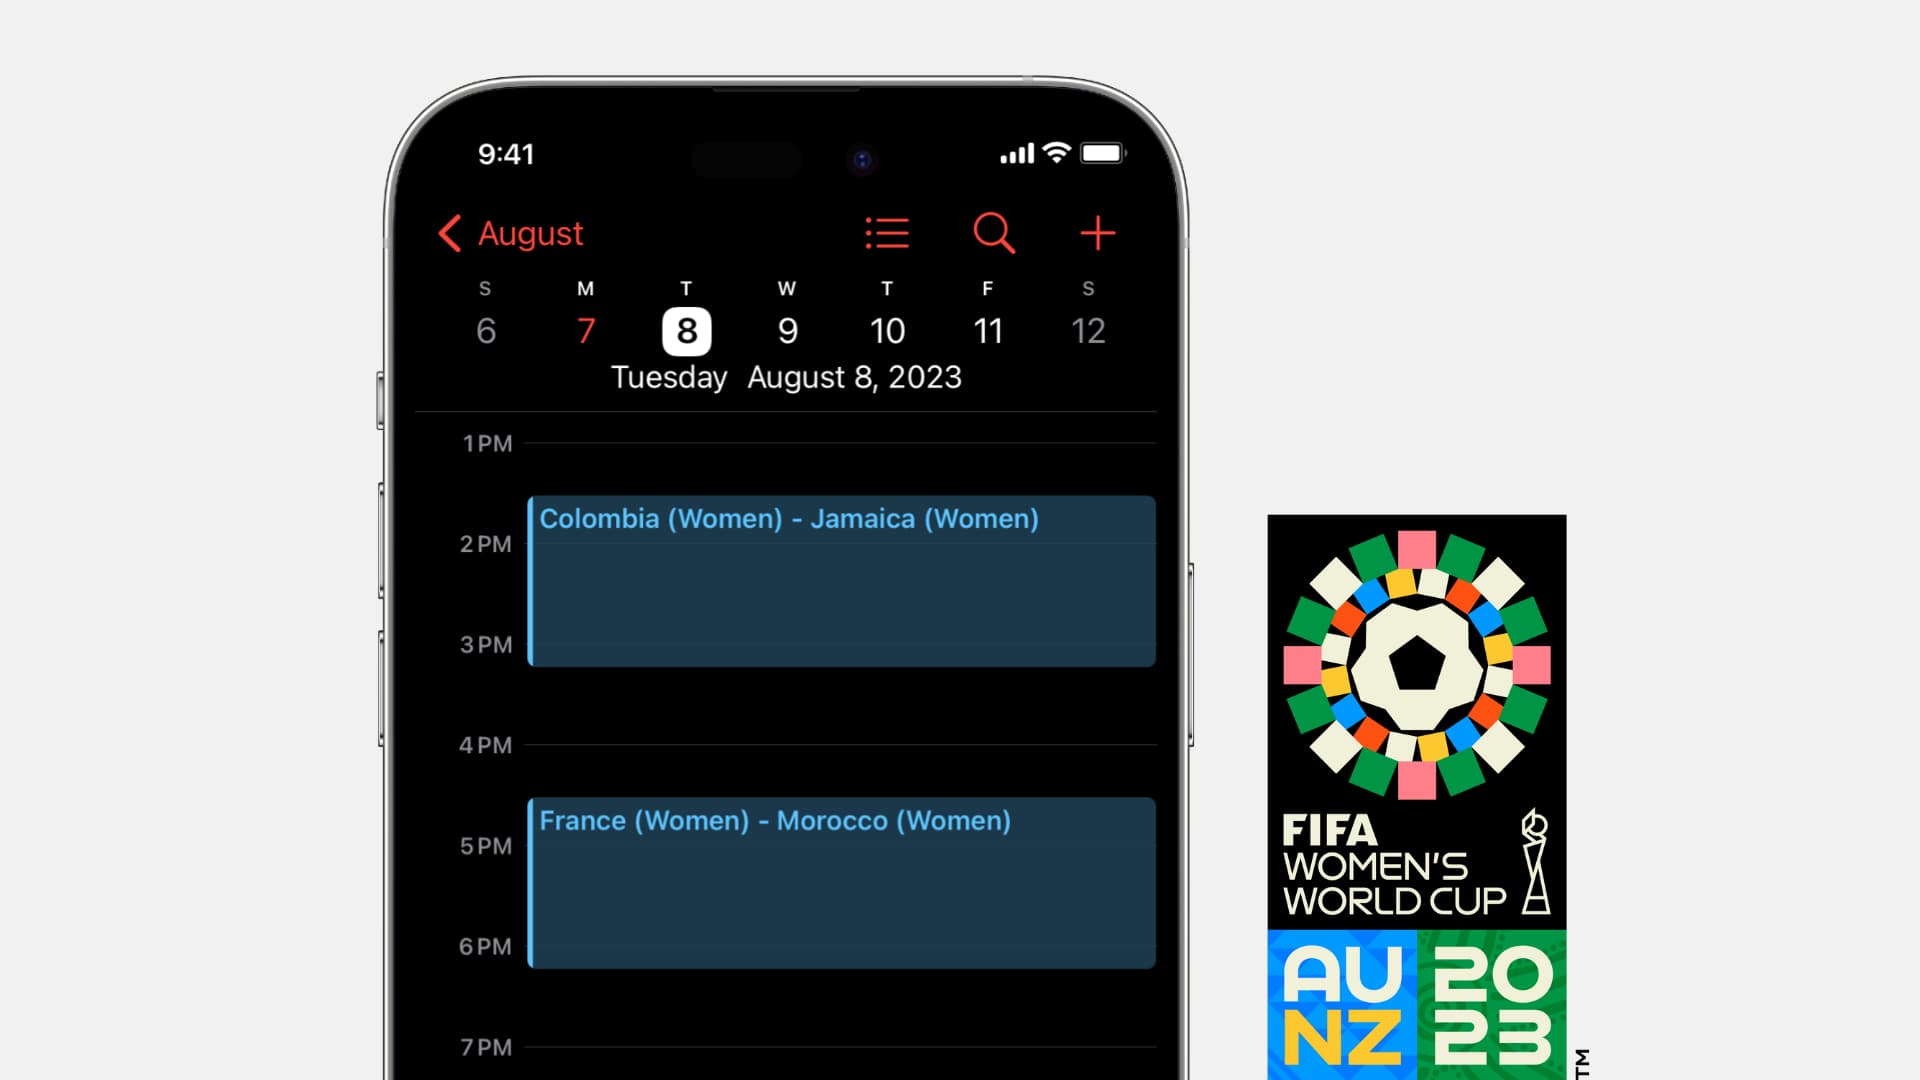 How to add the 2023 FIFA Womens World Cup schedule to your calendar